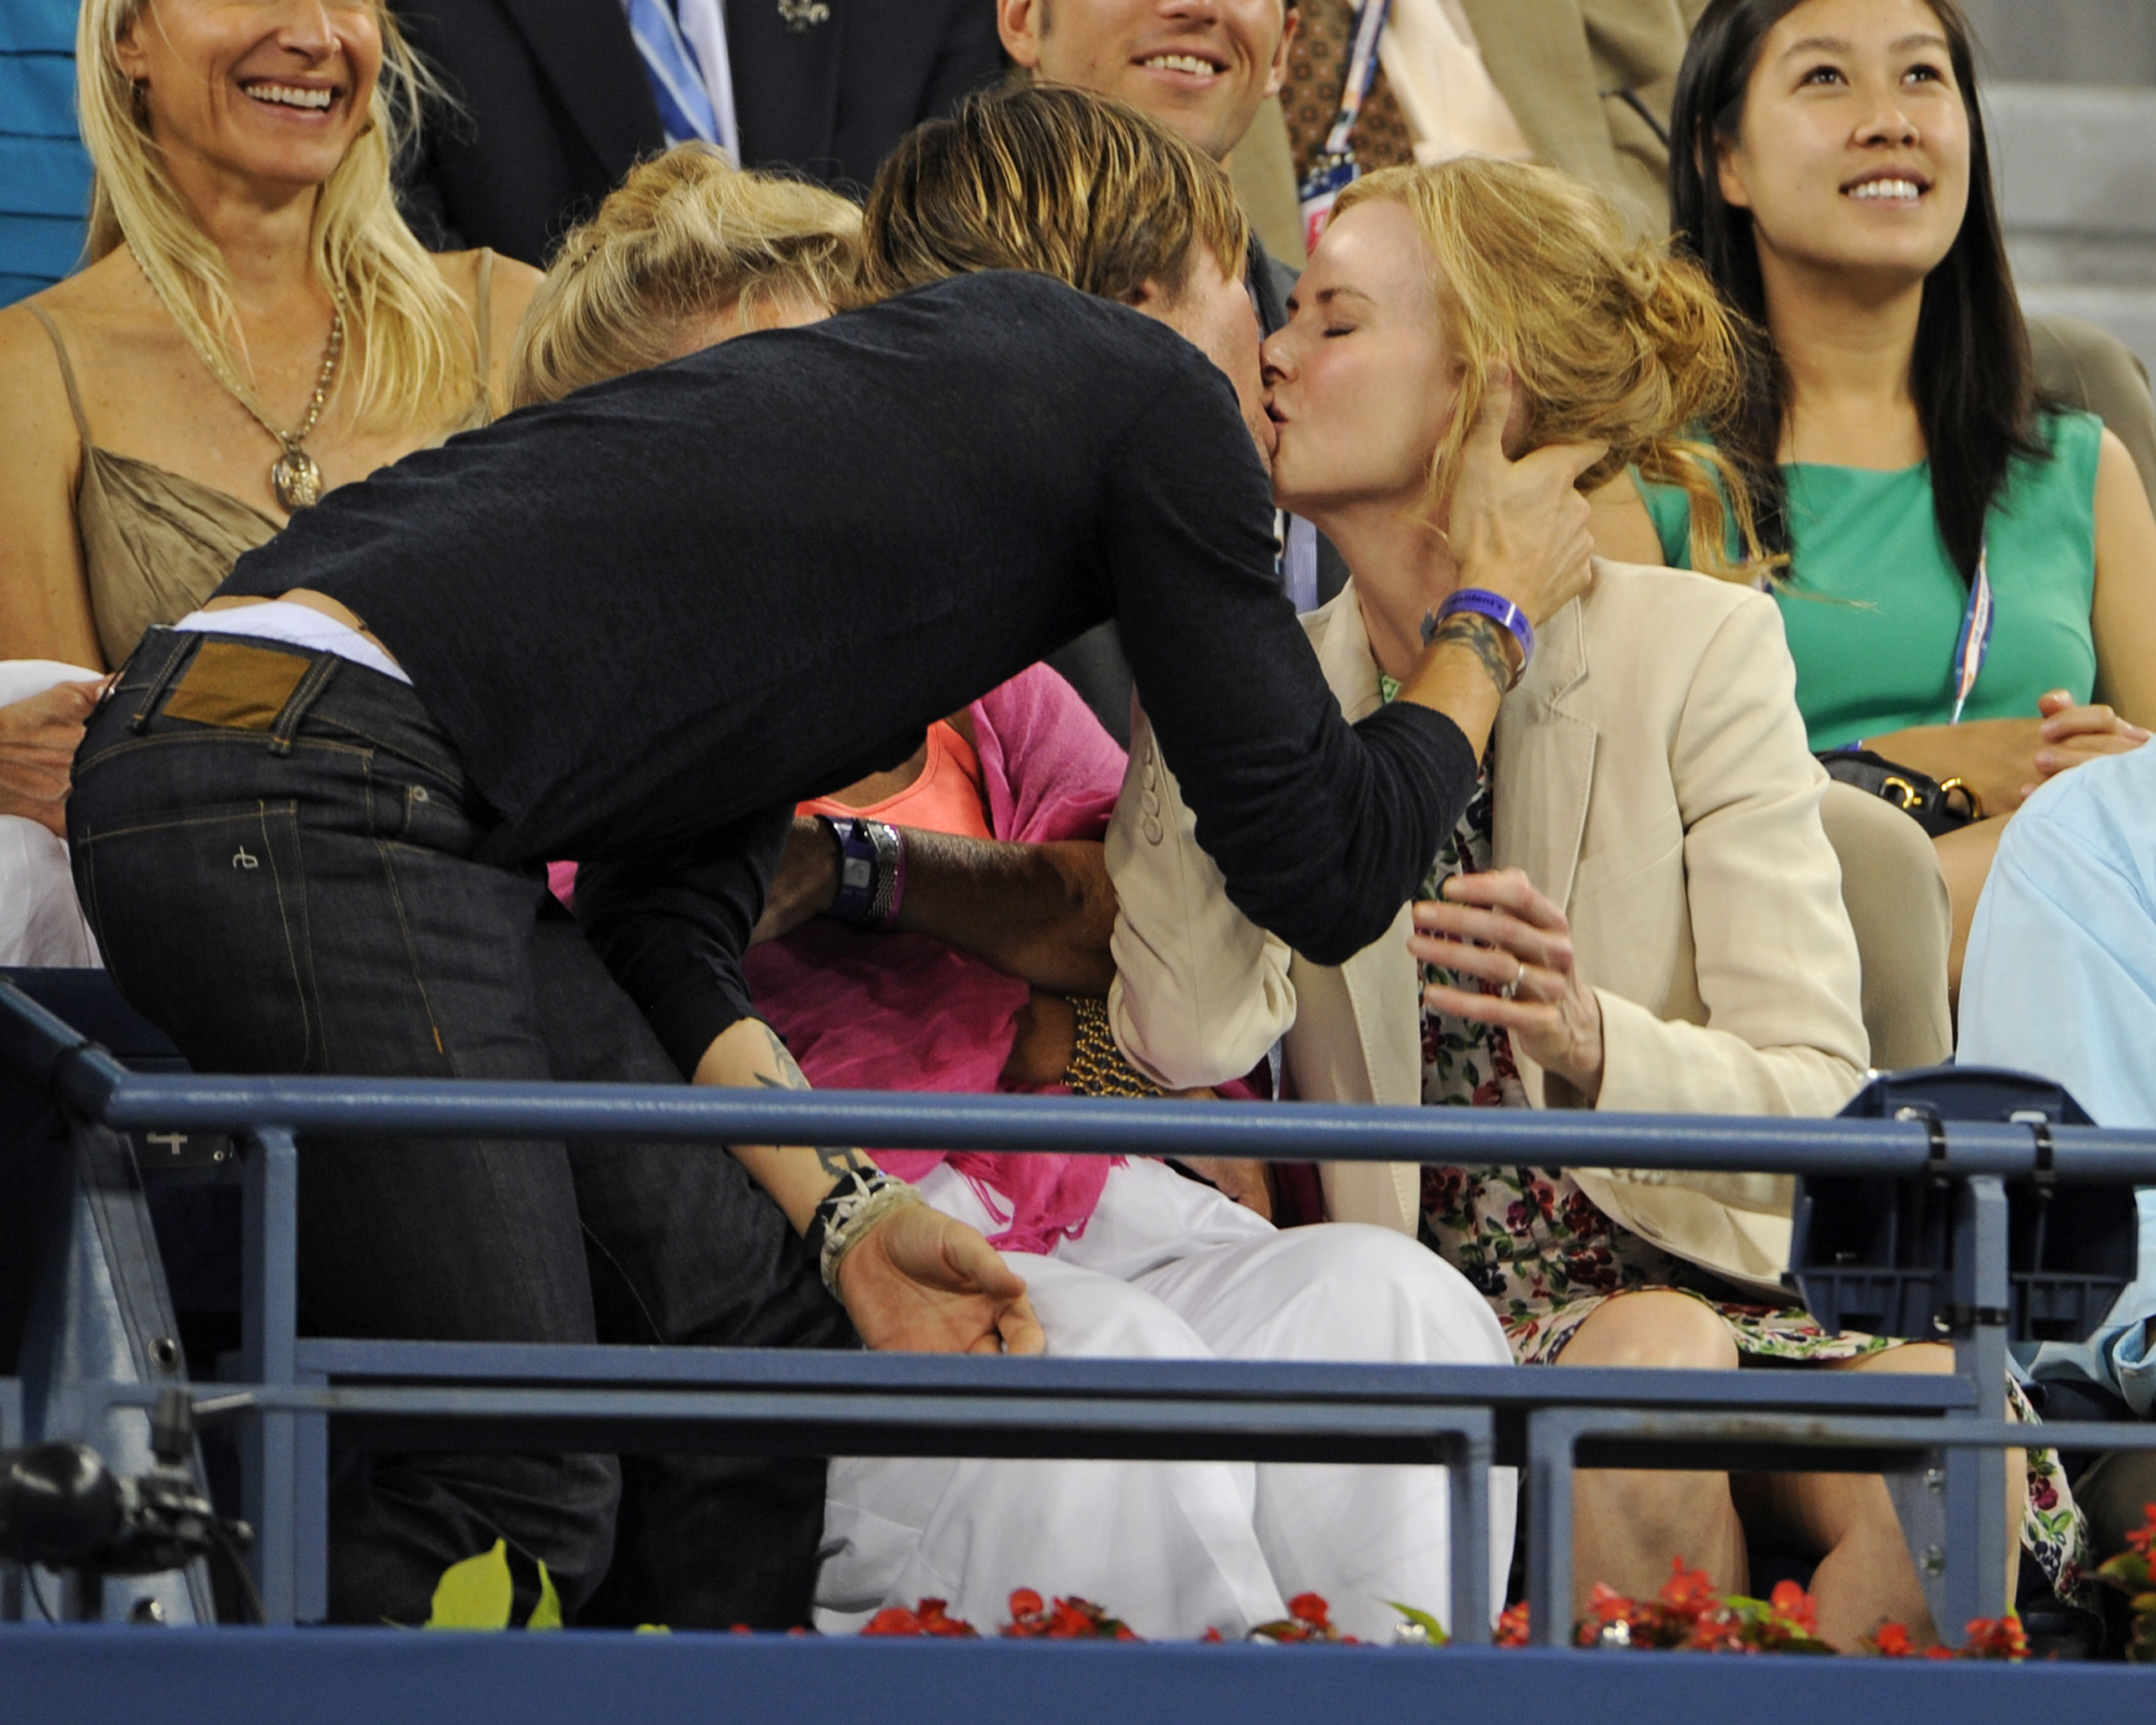 Nicole Kidman and Keith Urban attend the 2012 US Open at USTA Billie Jean King National Tennis Center on August 31, 2012 in New York City. | Source: Getty Images